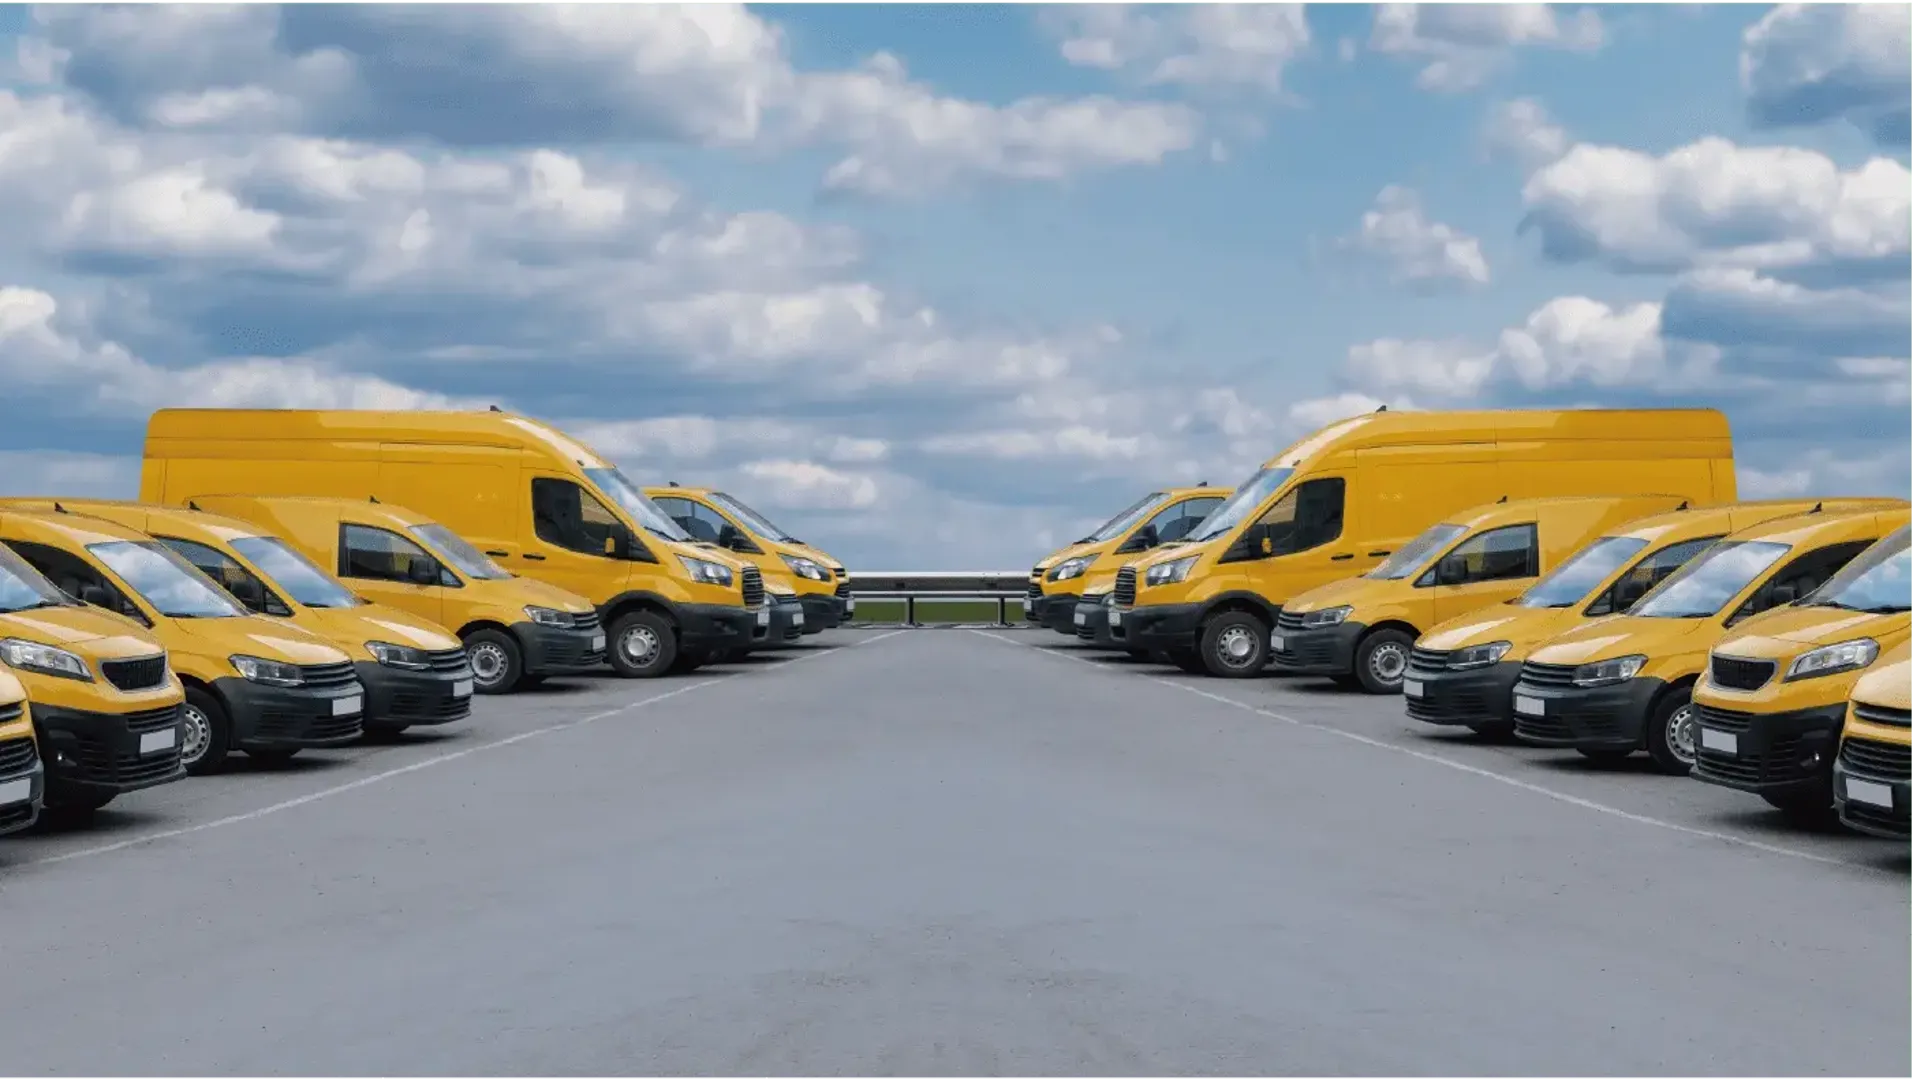 A line of yellow vans parked in a parking lot, ready for use.